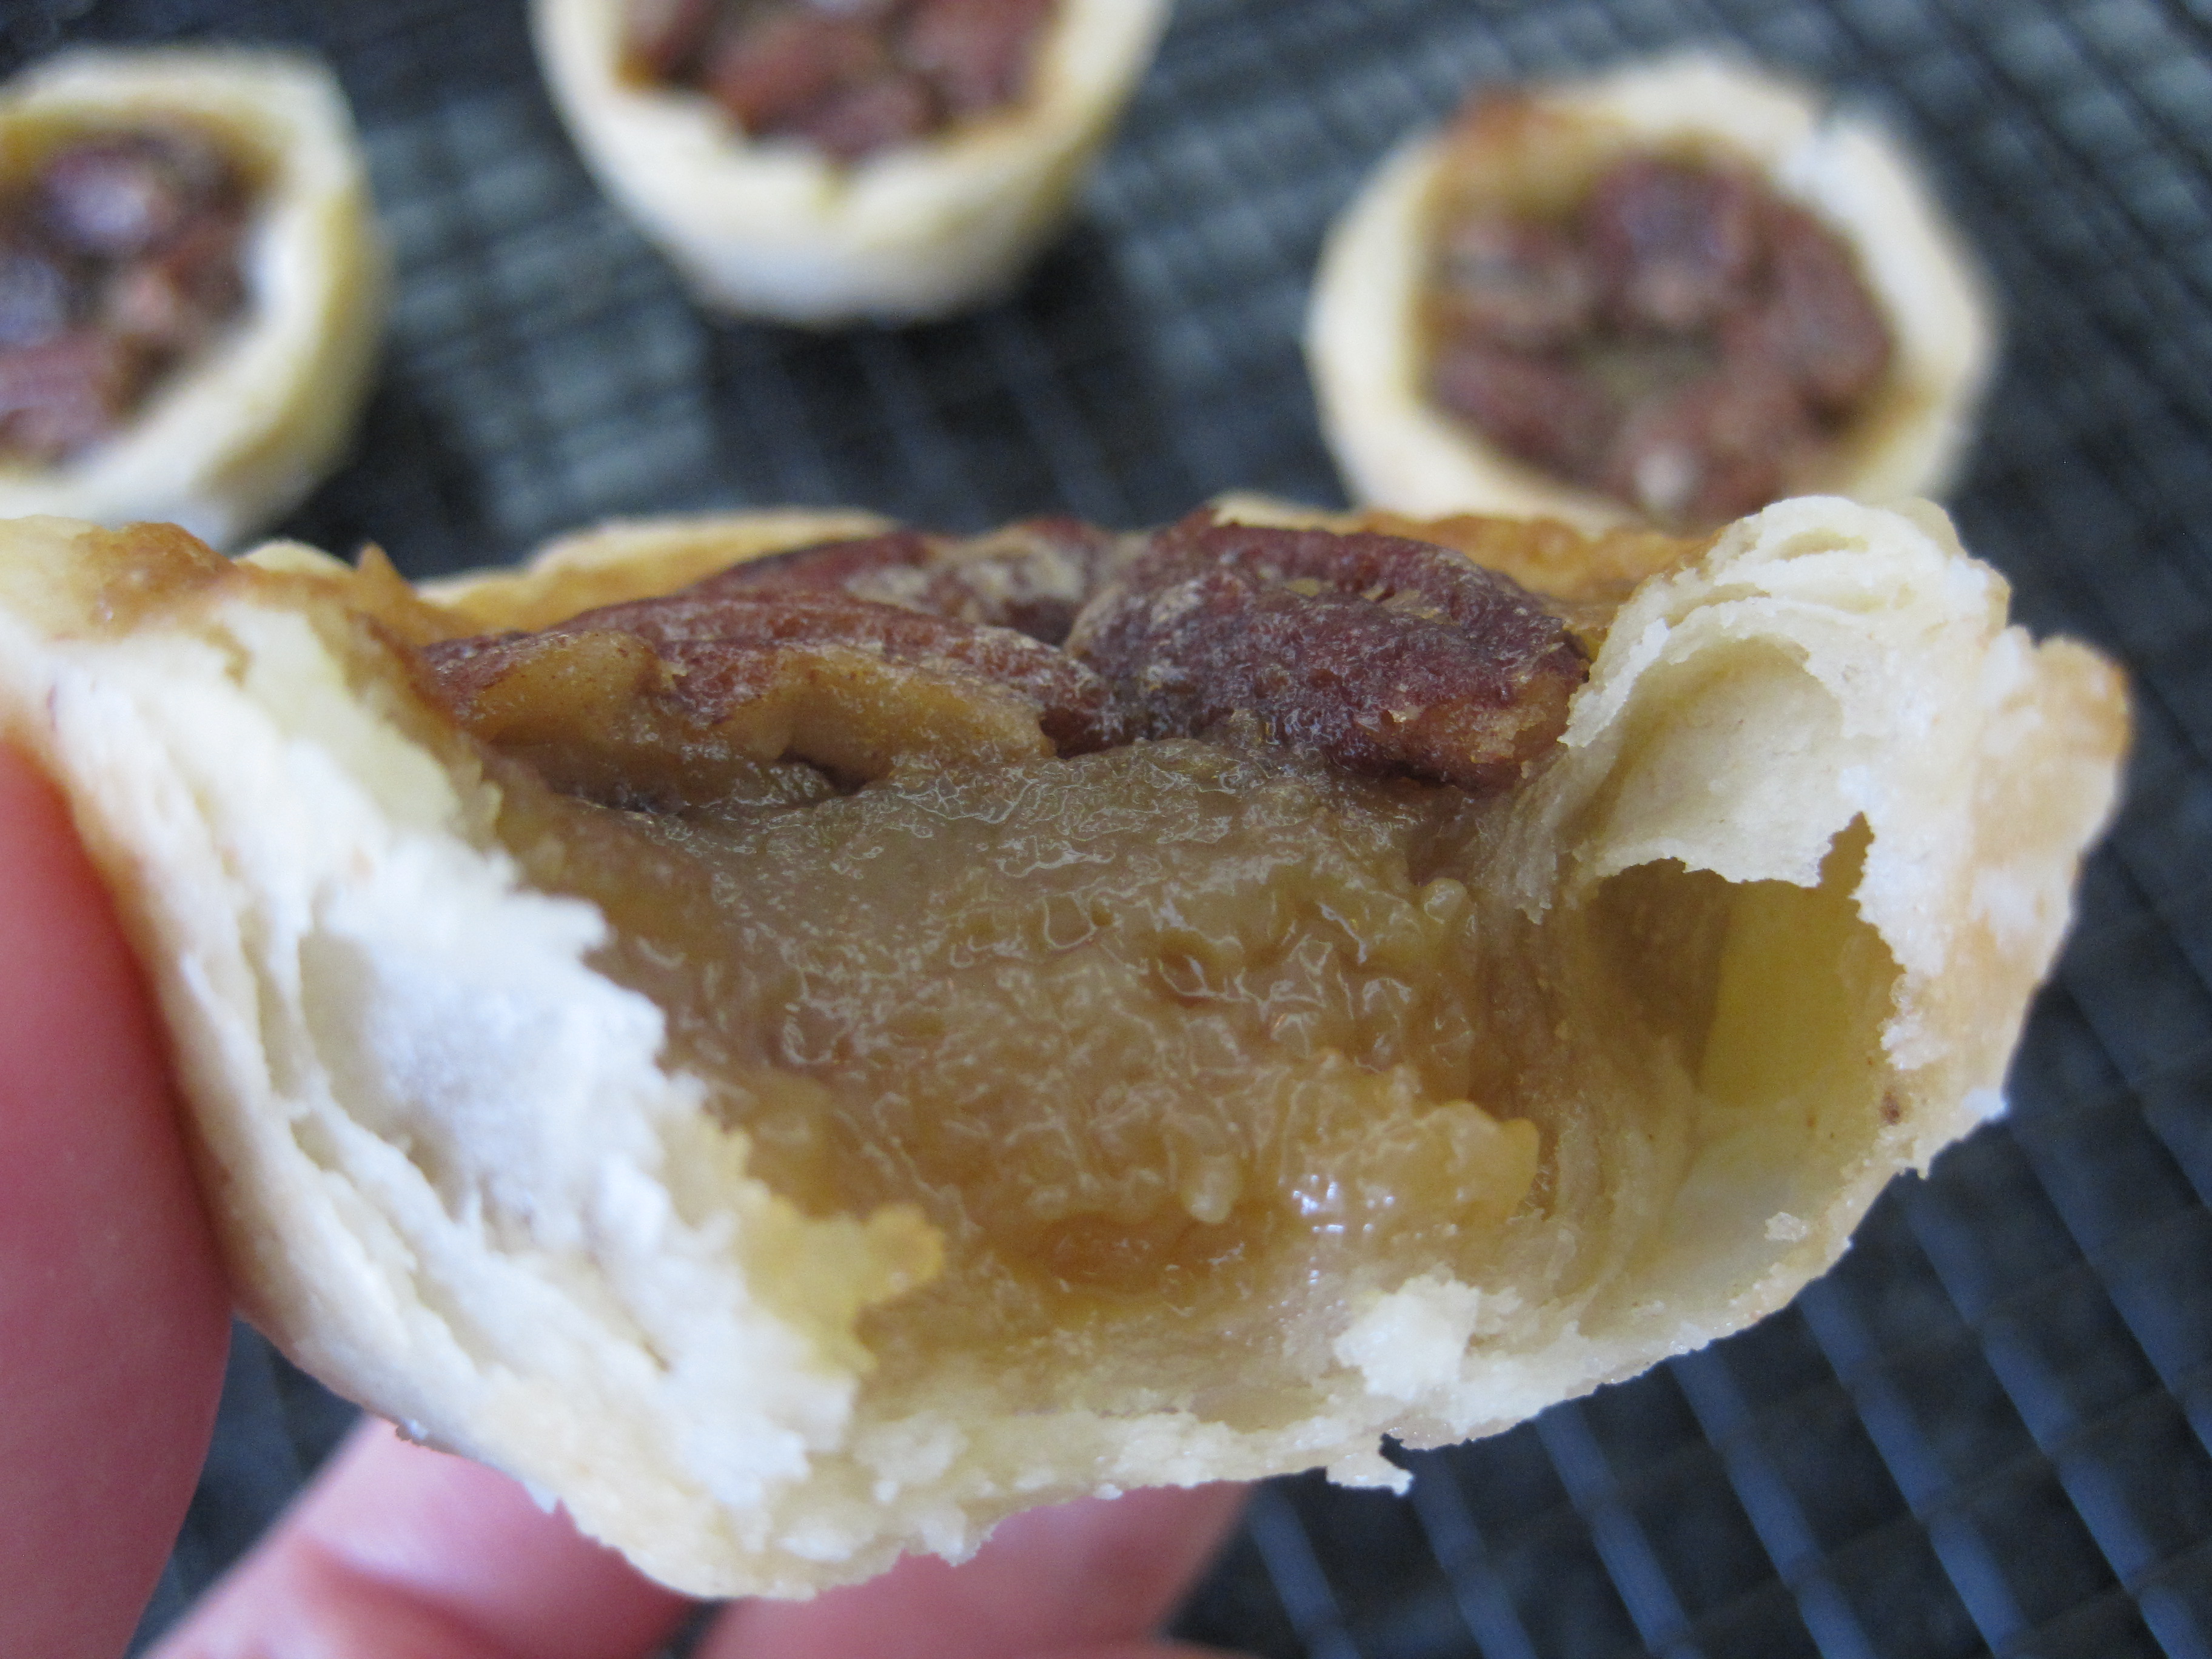 What is an easy recipe for butter tarts?